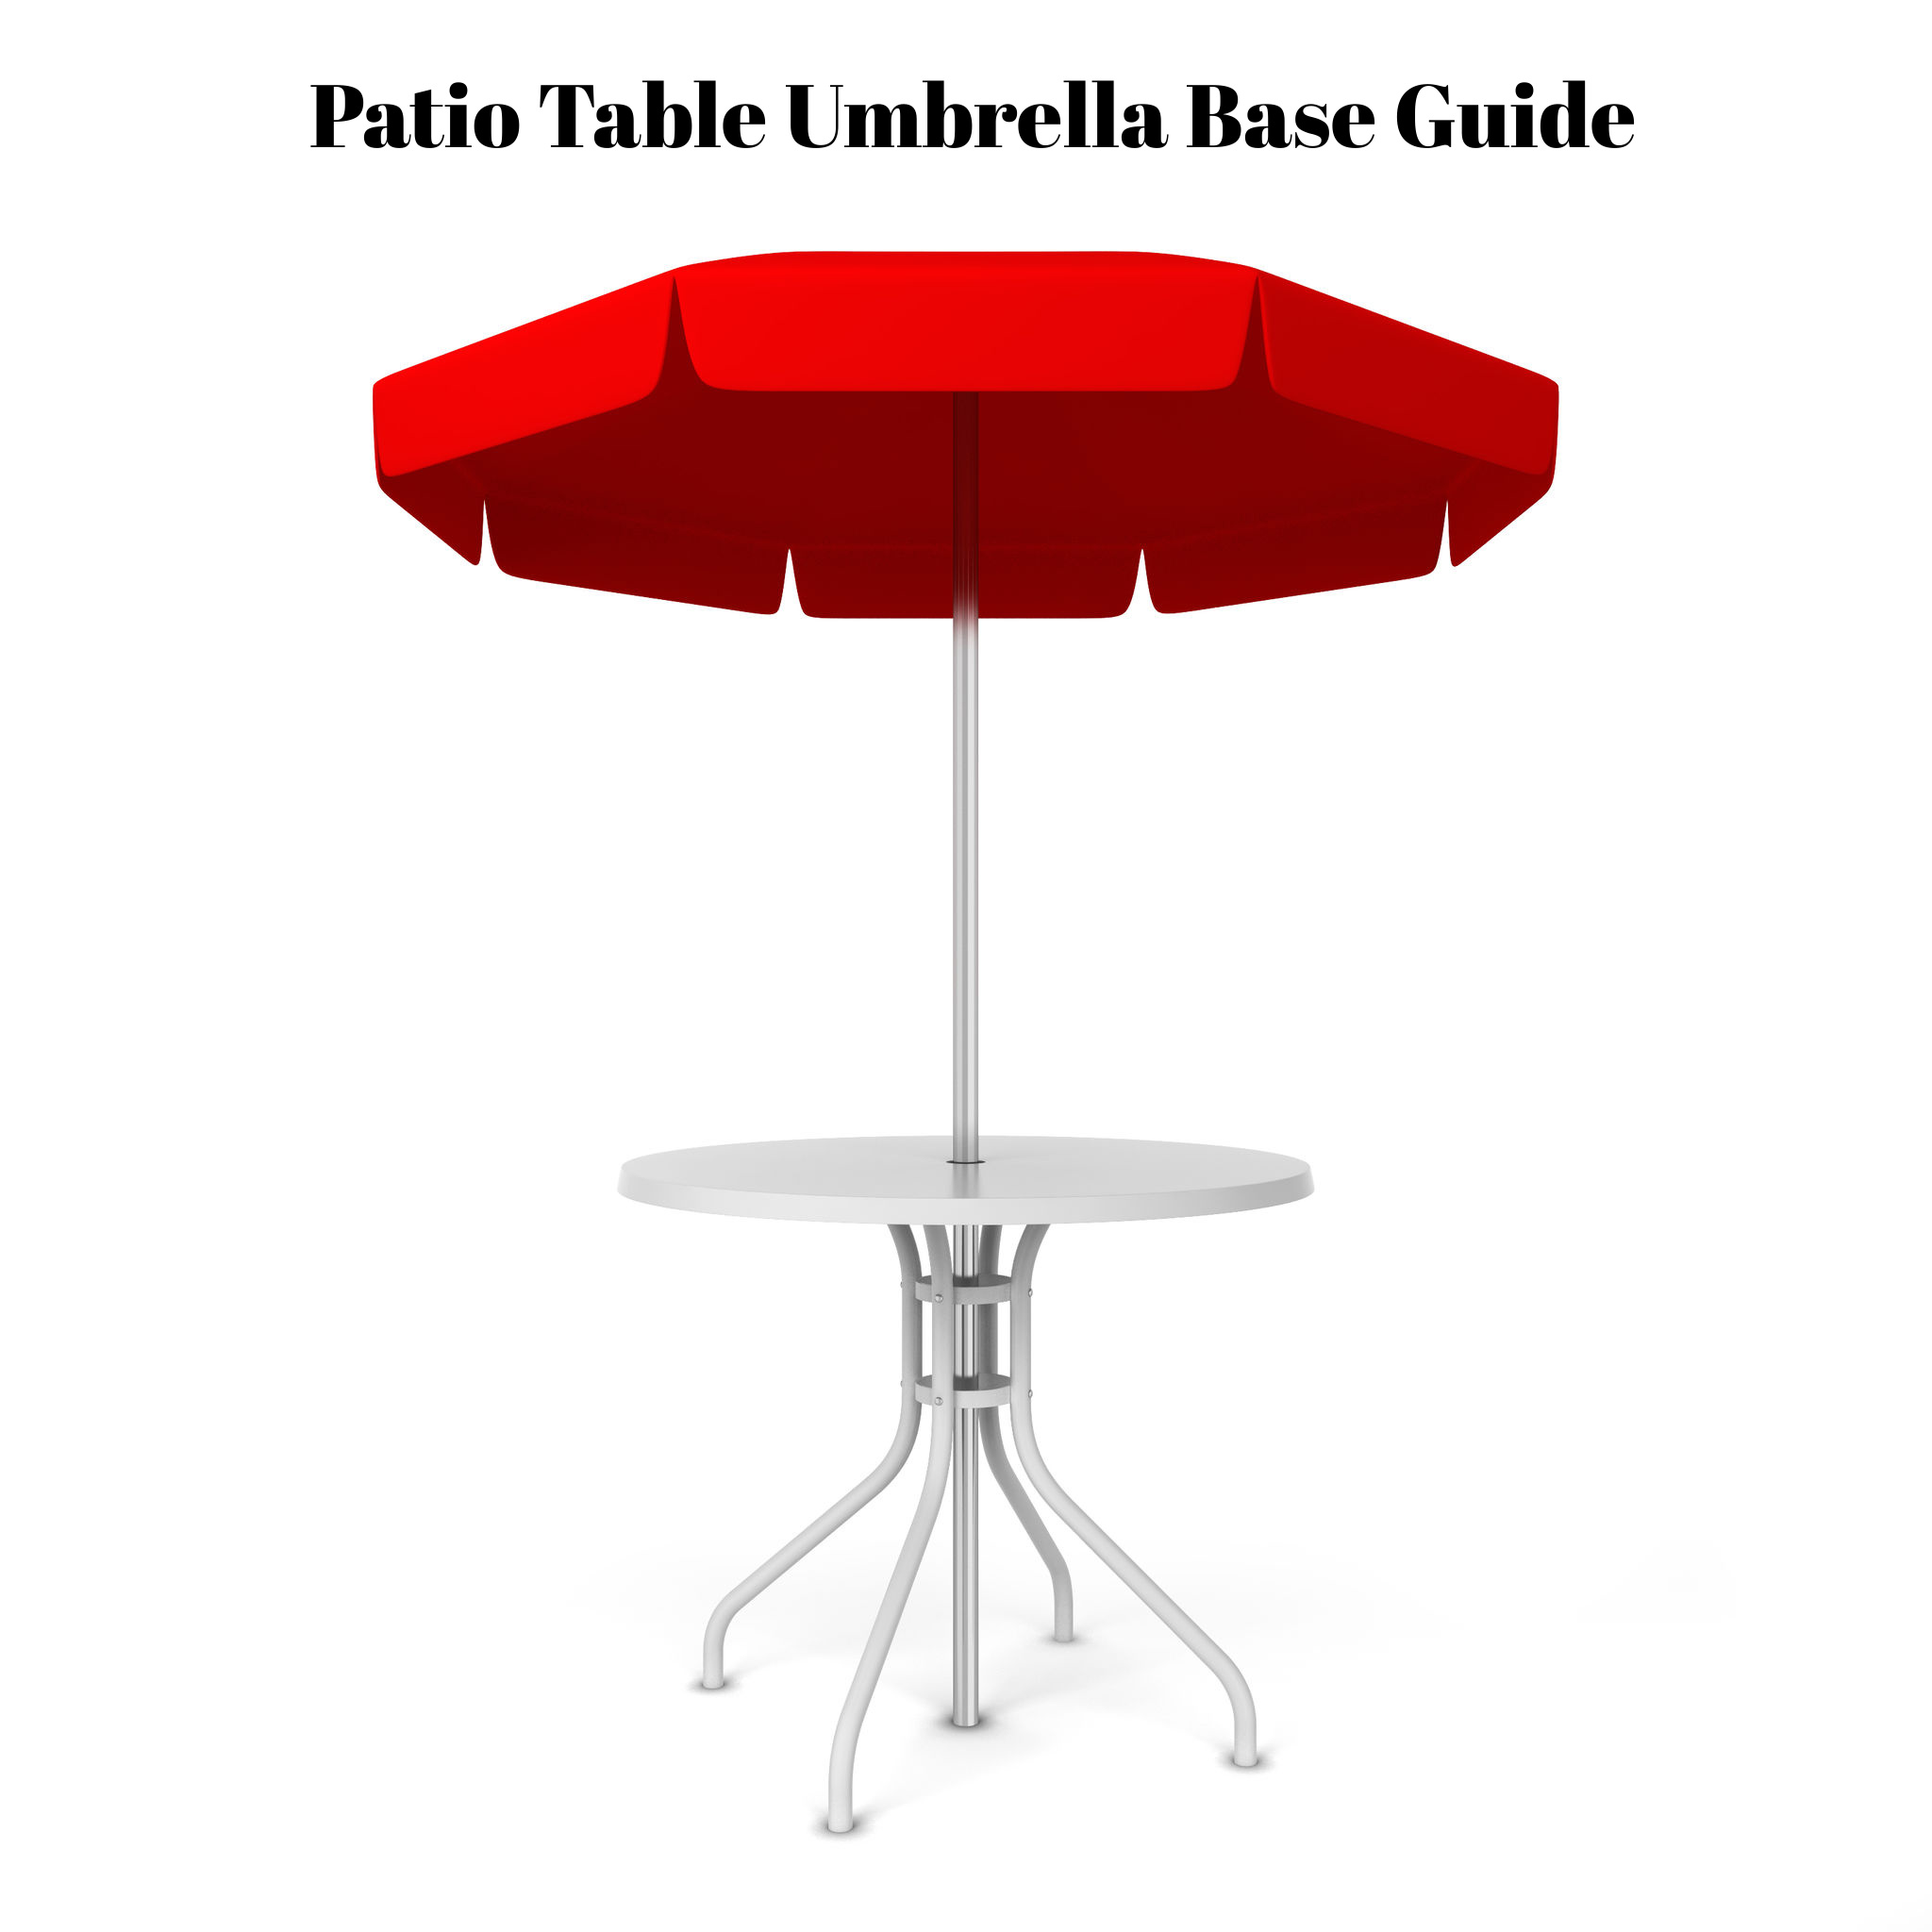 Outdoor Umbrellas Your Guide To, What Size Umbrella For A 48 Inch Round Table